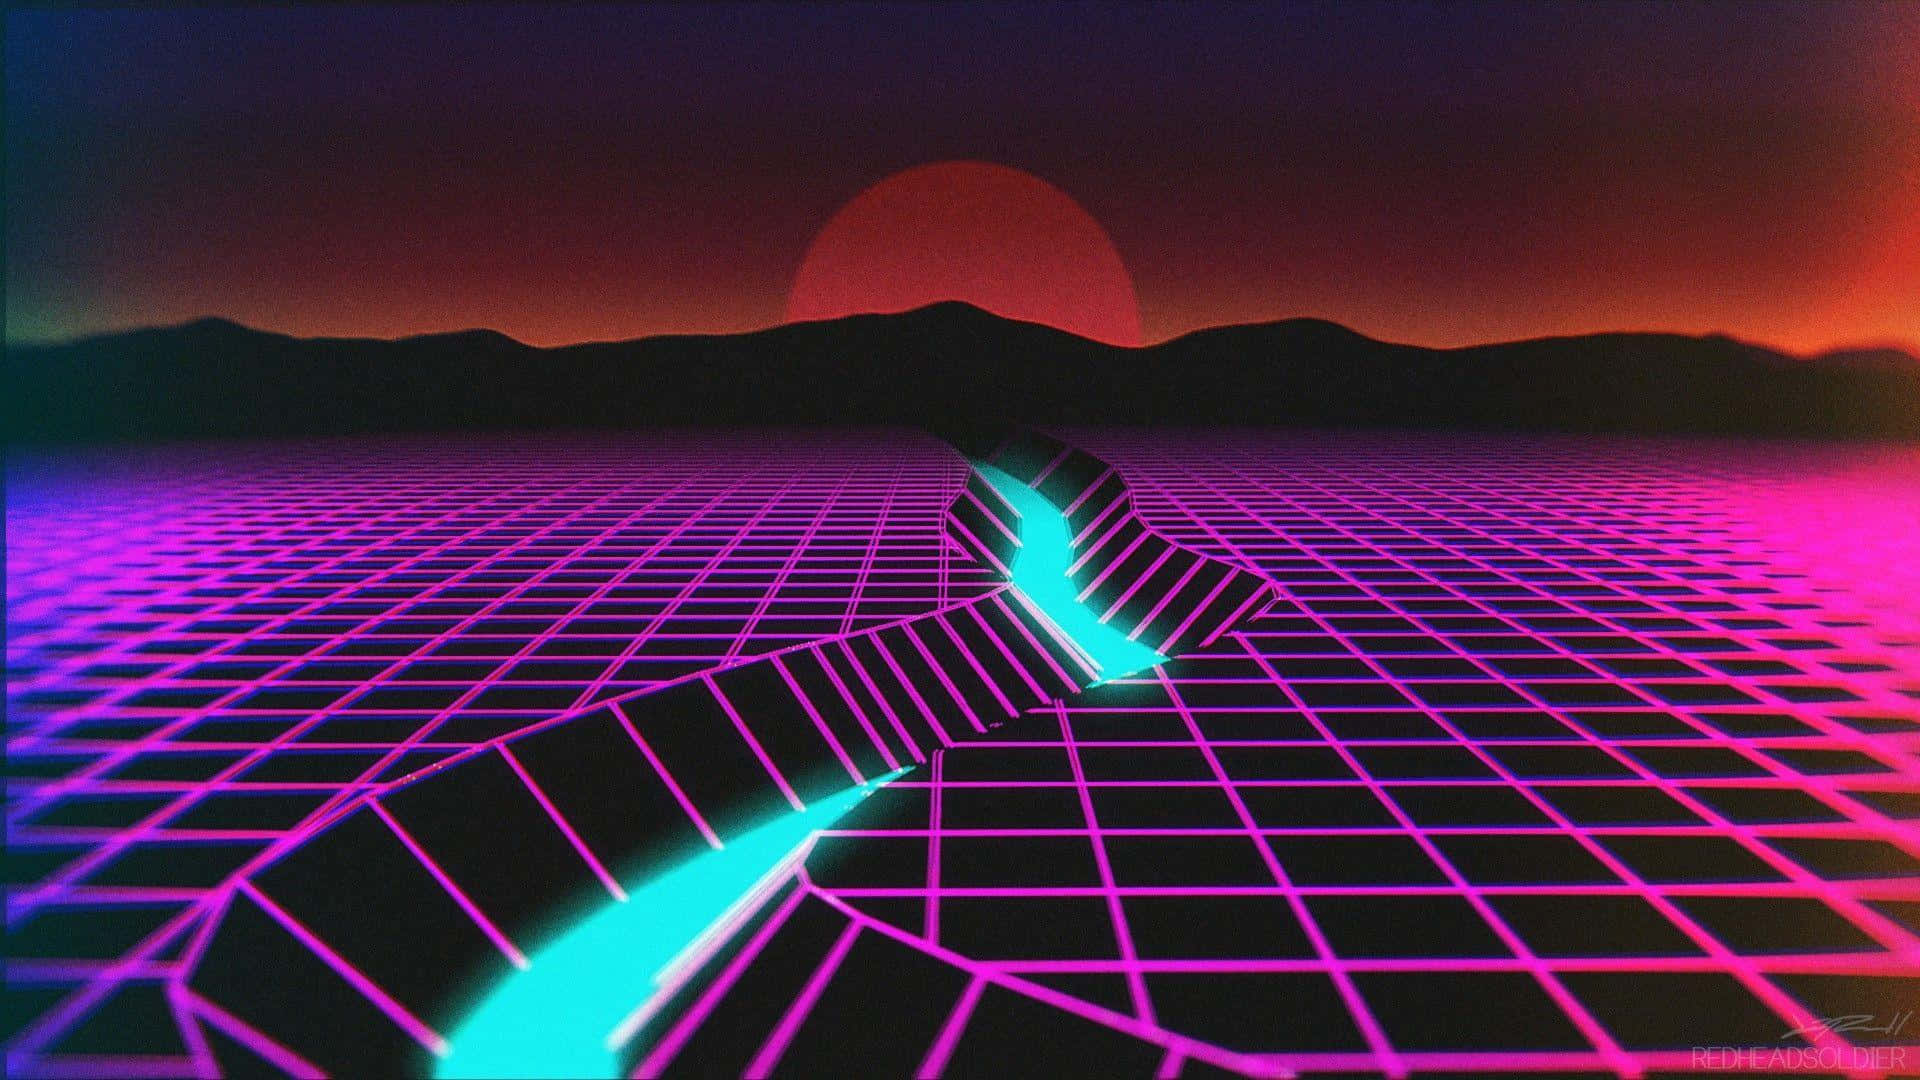 "Discover a new world of possibilities in Synthwave"-